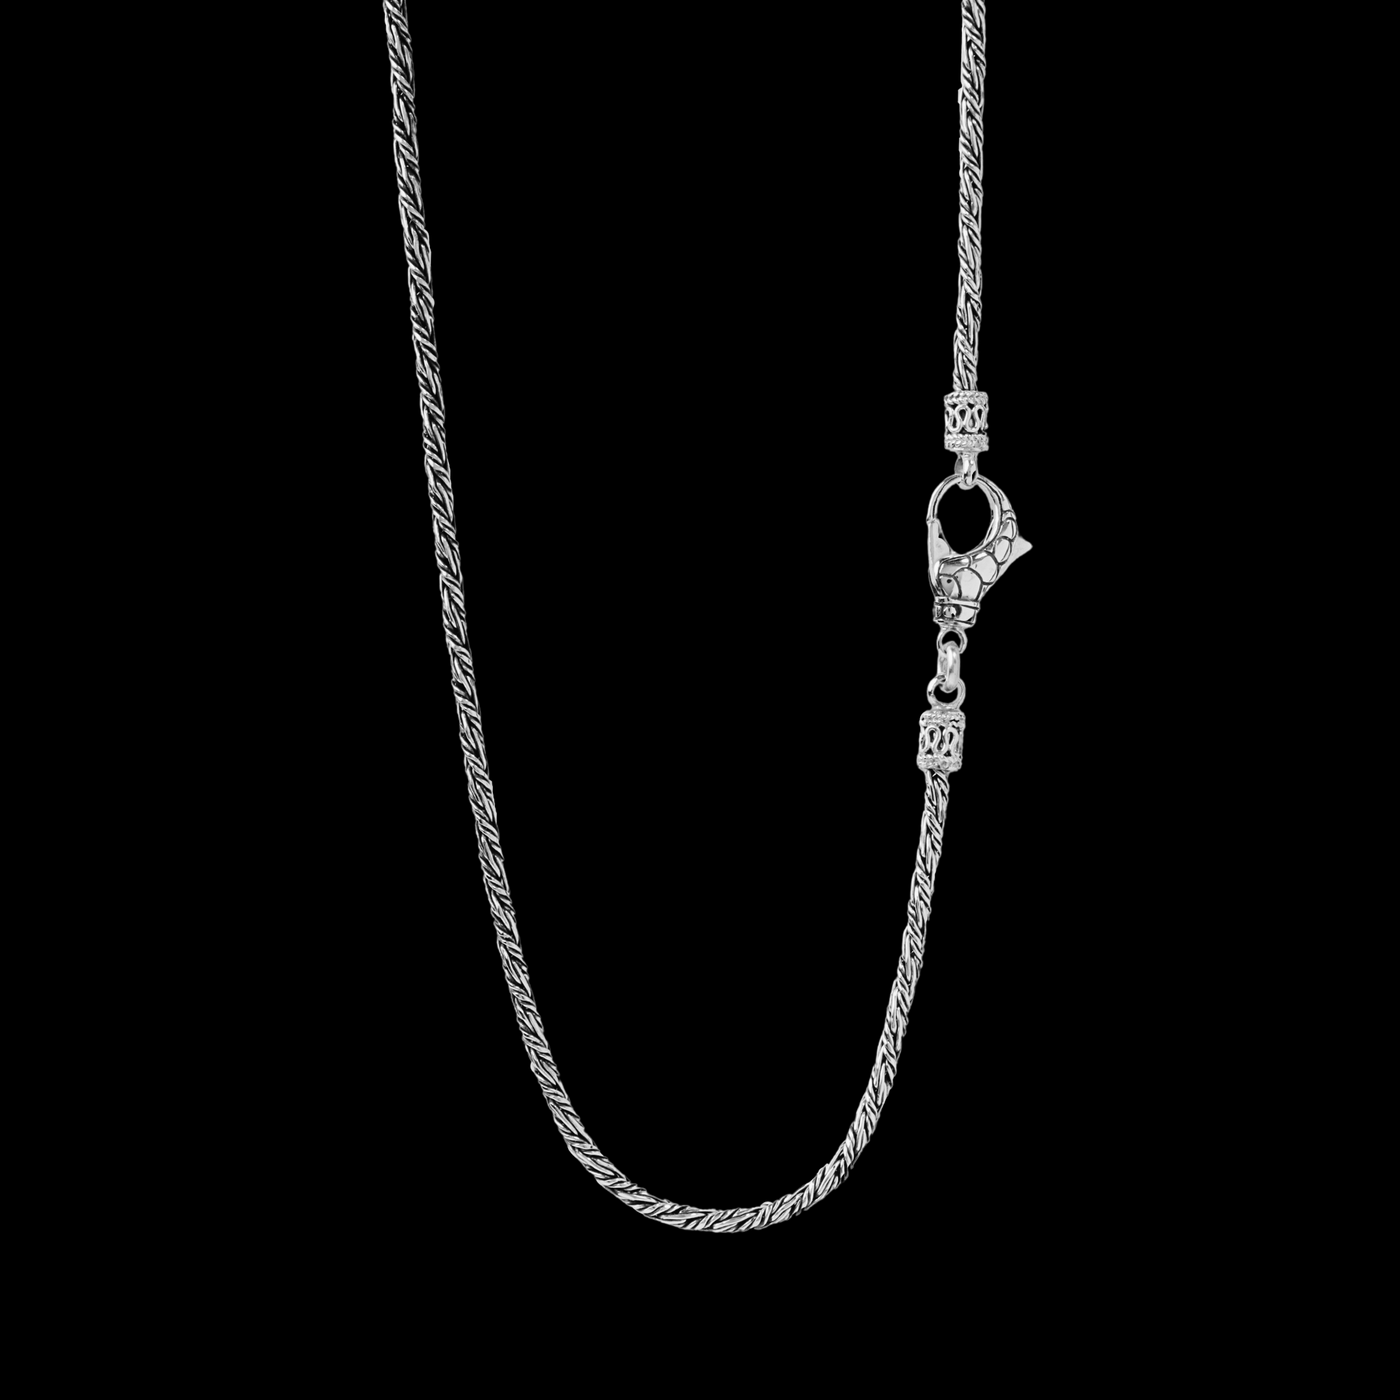 Bali Silver Necklace (2.5 mm)